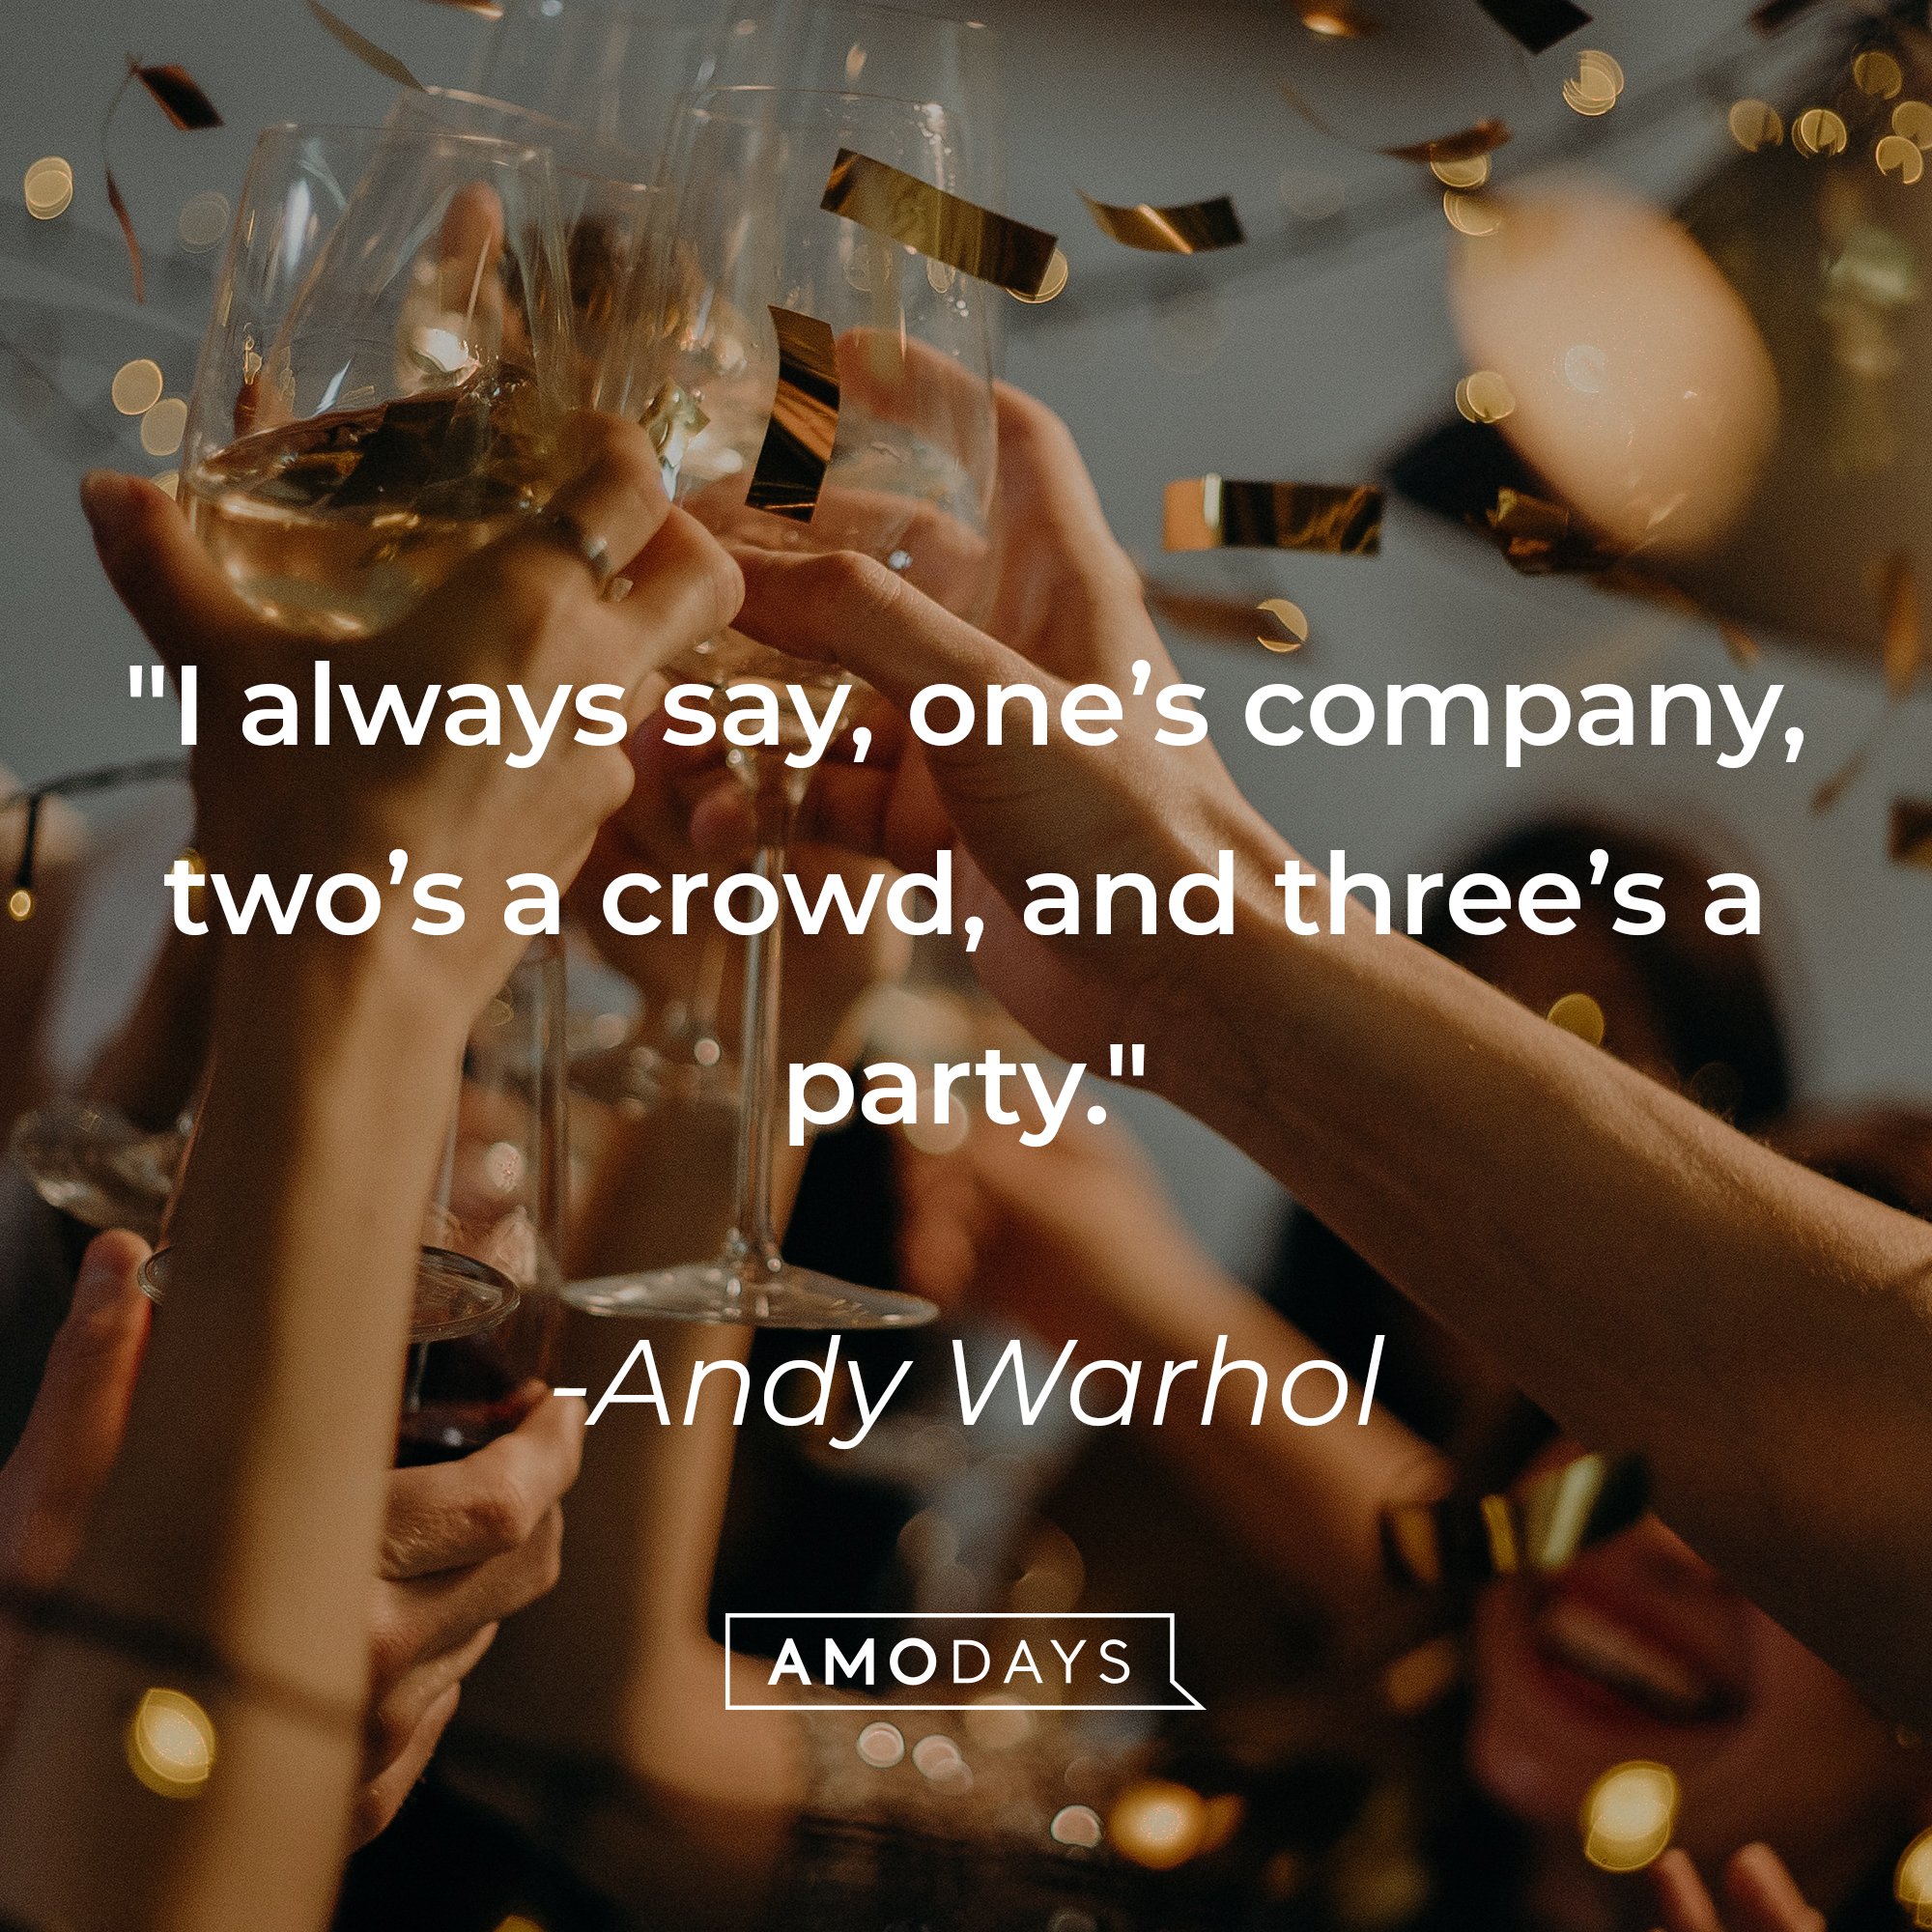  Andy Warhol's quote: "I always say, one’s company, two’s a crowd, and three’s a party." | Image: AmoDays